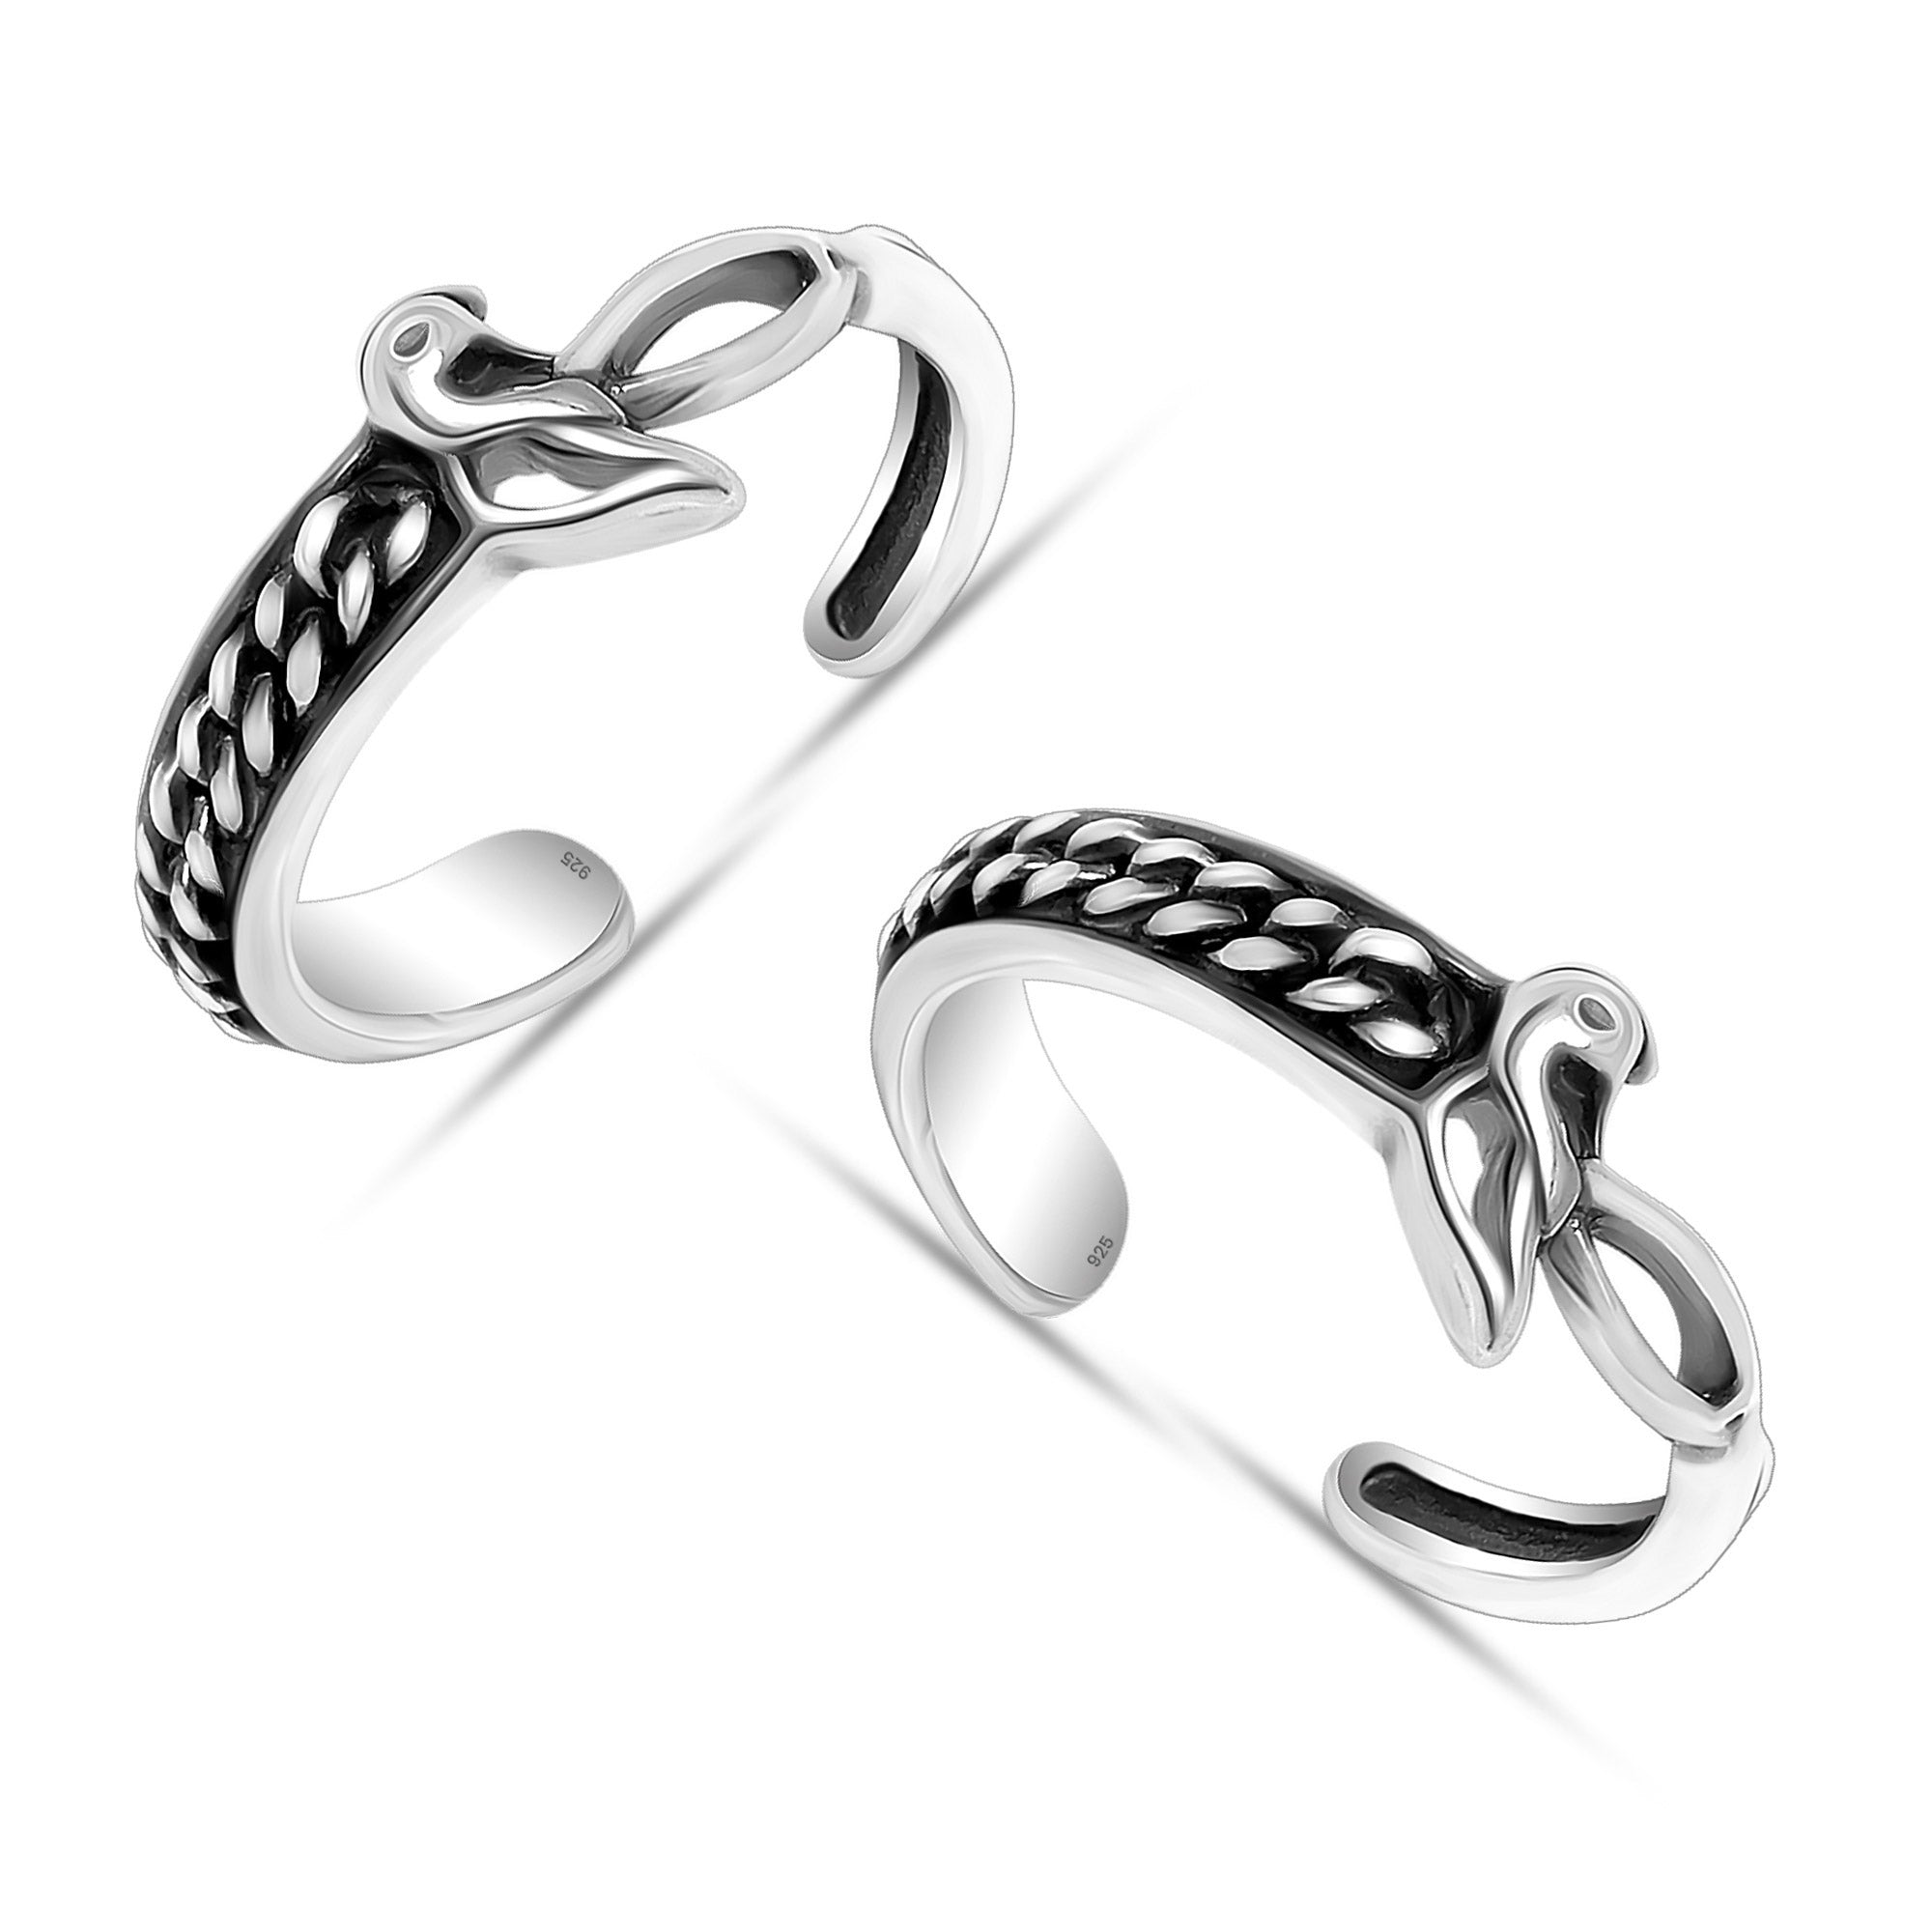 925 Sterling Silver Oxidized Peacock Design Toe Rings for Women